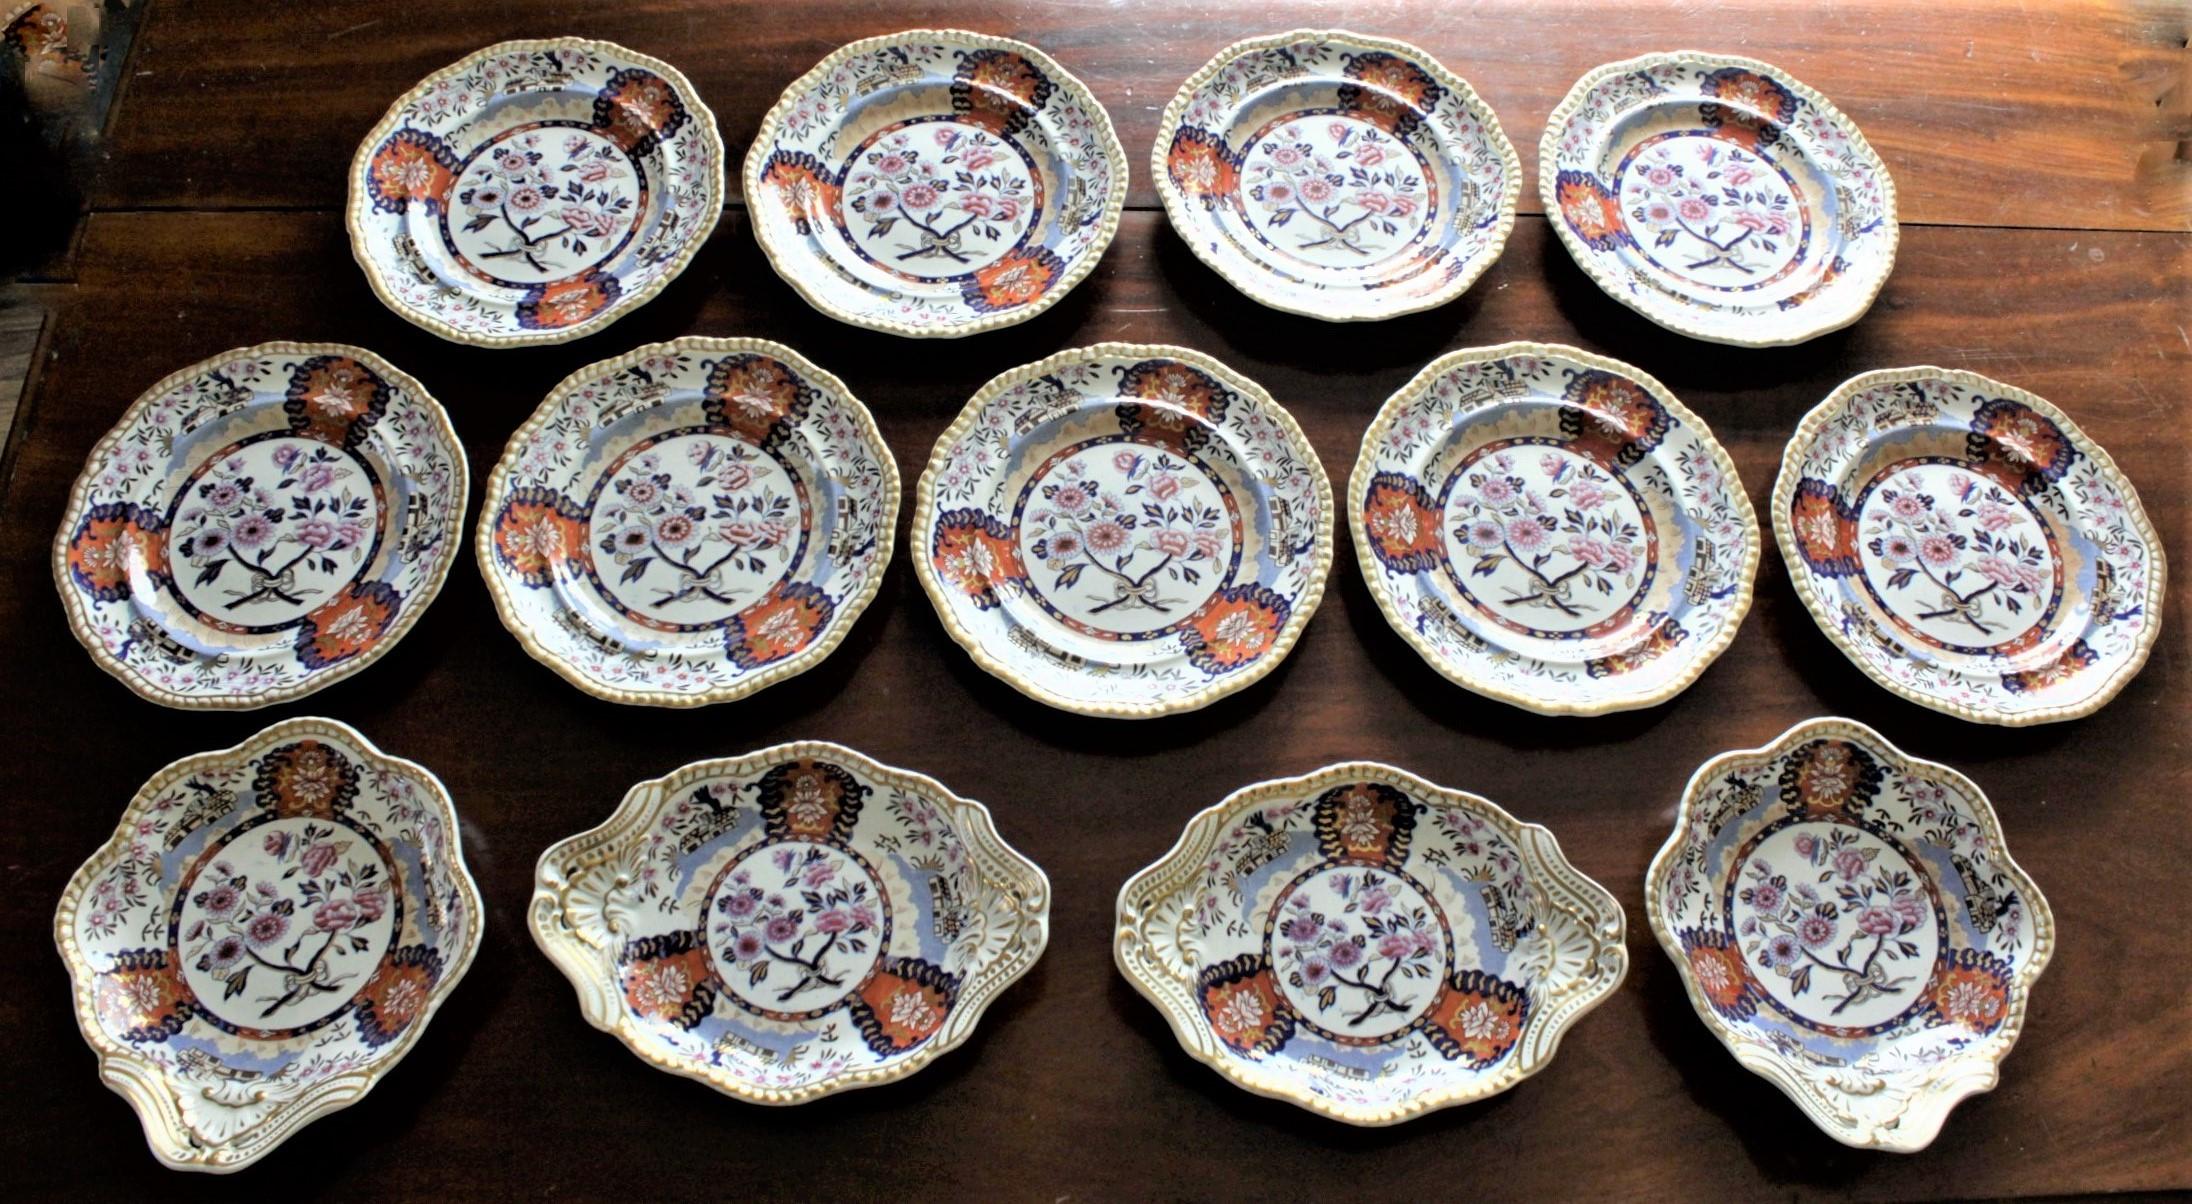 This antique set of plates and bowls was made by the Spode factory of England in approximately 1823 in a Chinese inspired style. The set consists of nine luncheon plates, two sweet meat dishes and two serving bowls. Each piece is decorated with